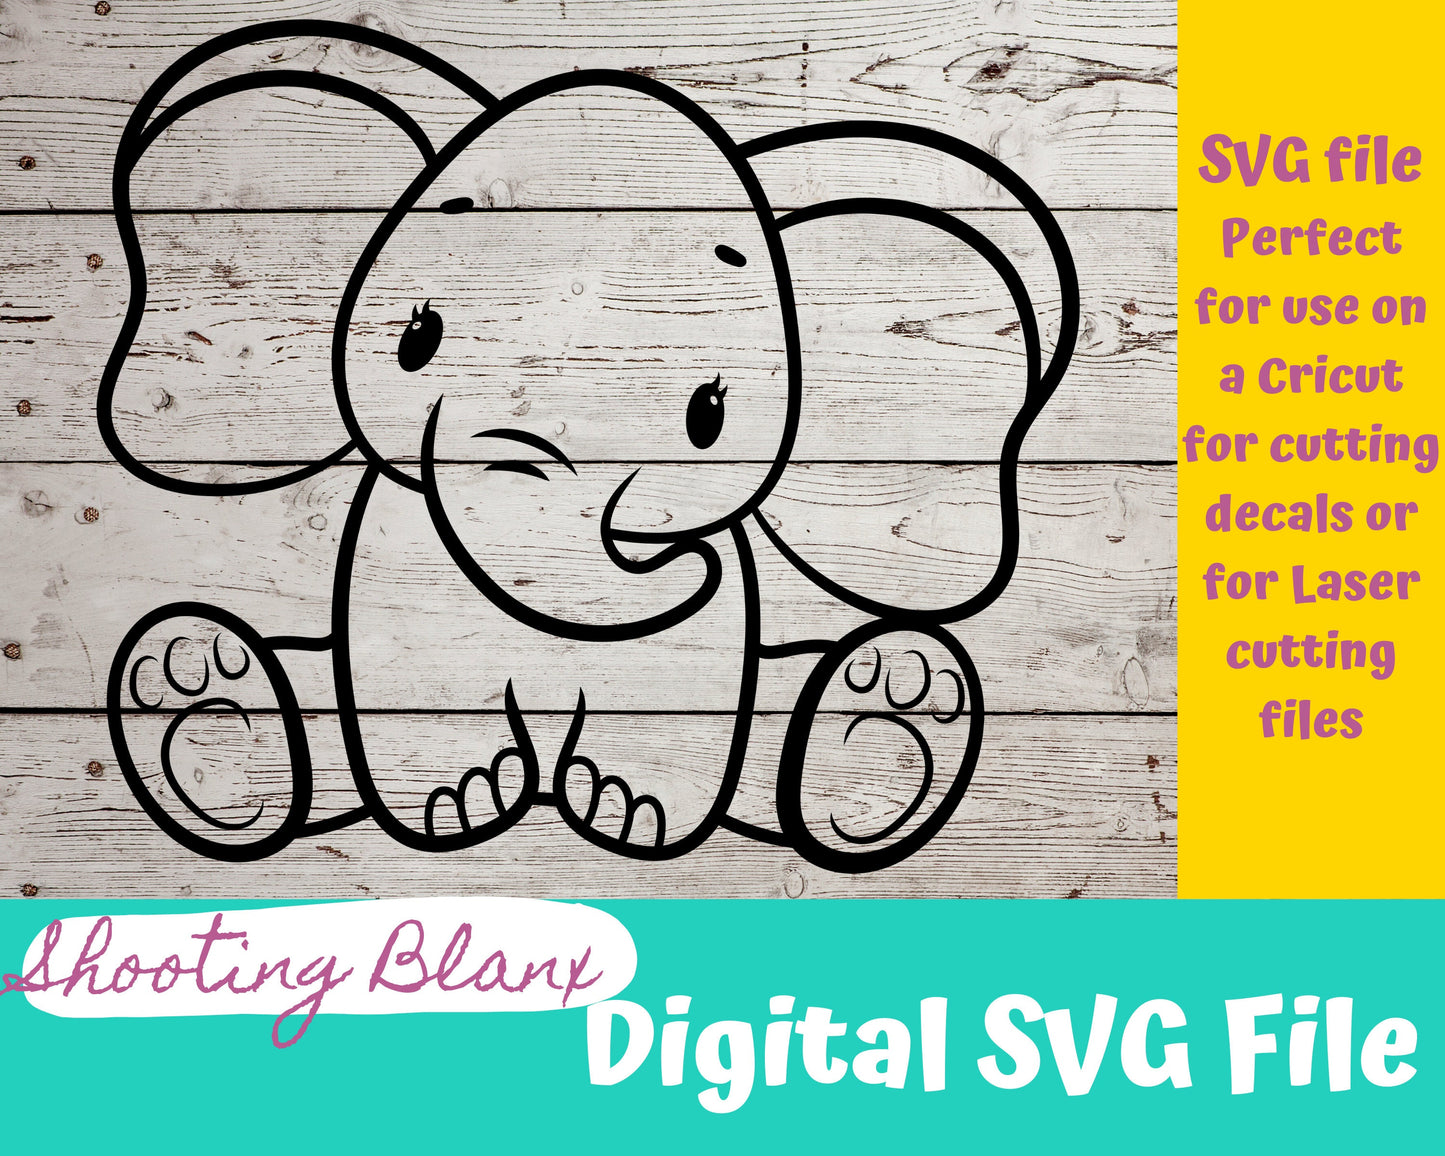 Elephant baby SVG file perfect for Cricut, Cameo, or Silhouette also engraving Glowforge, baby shower